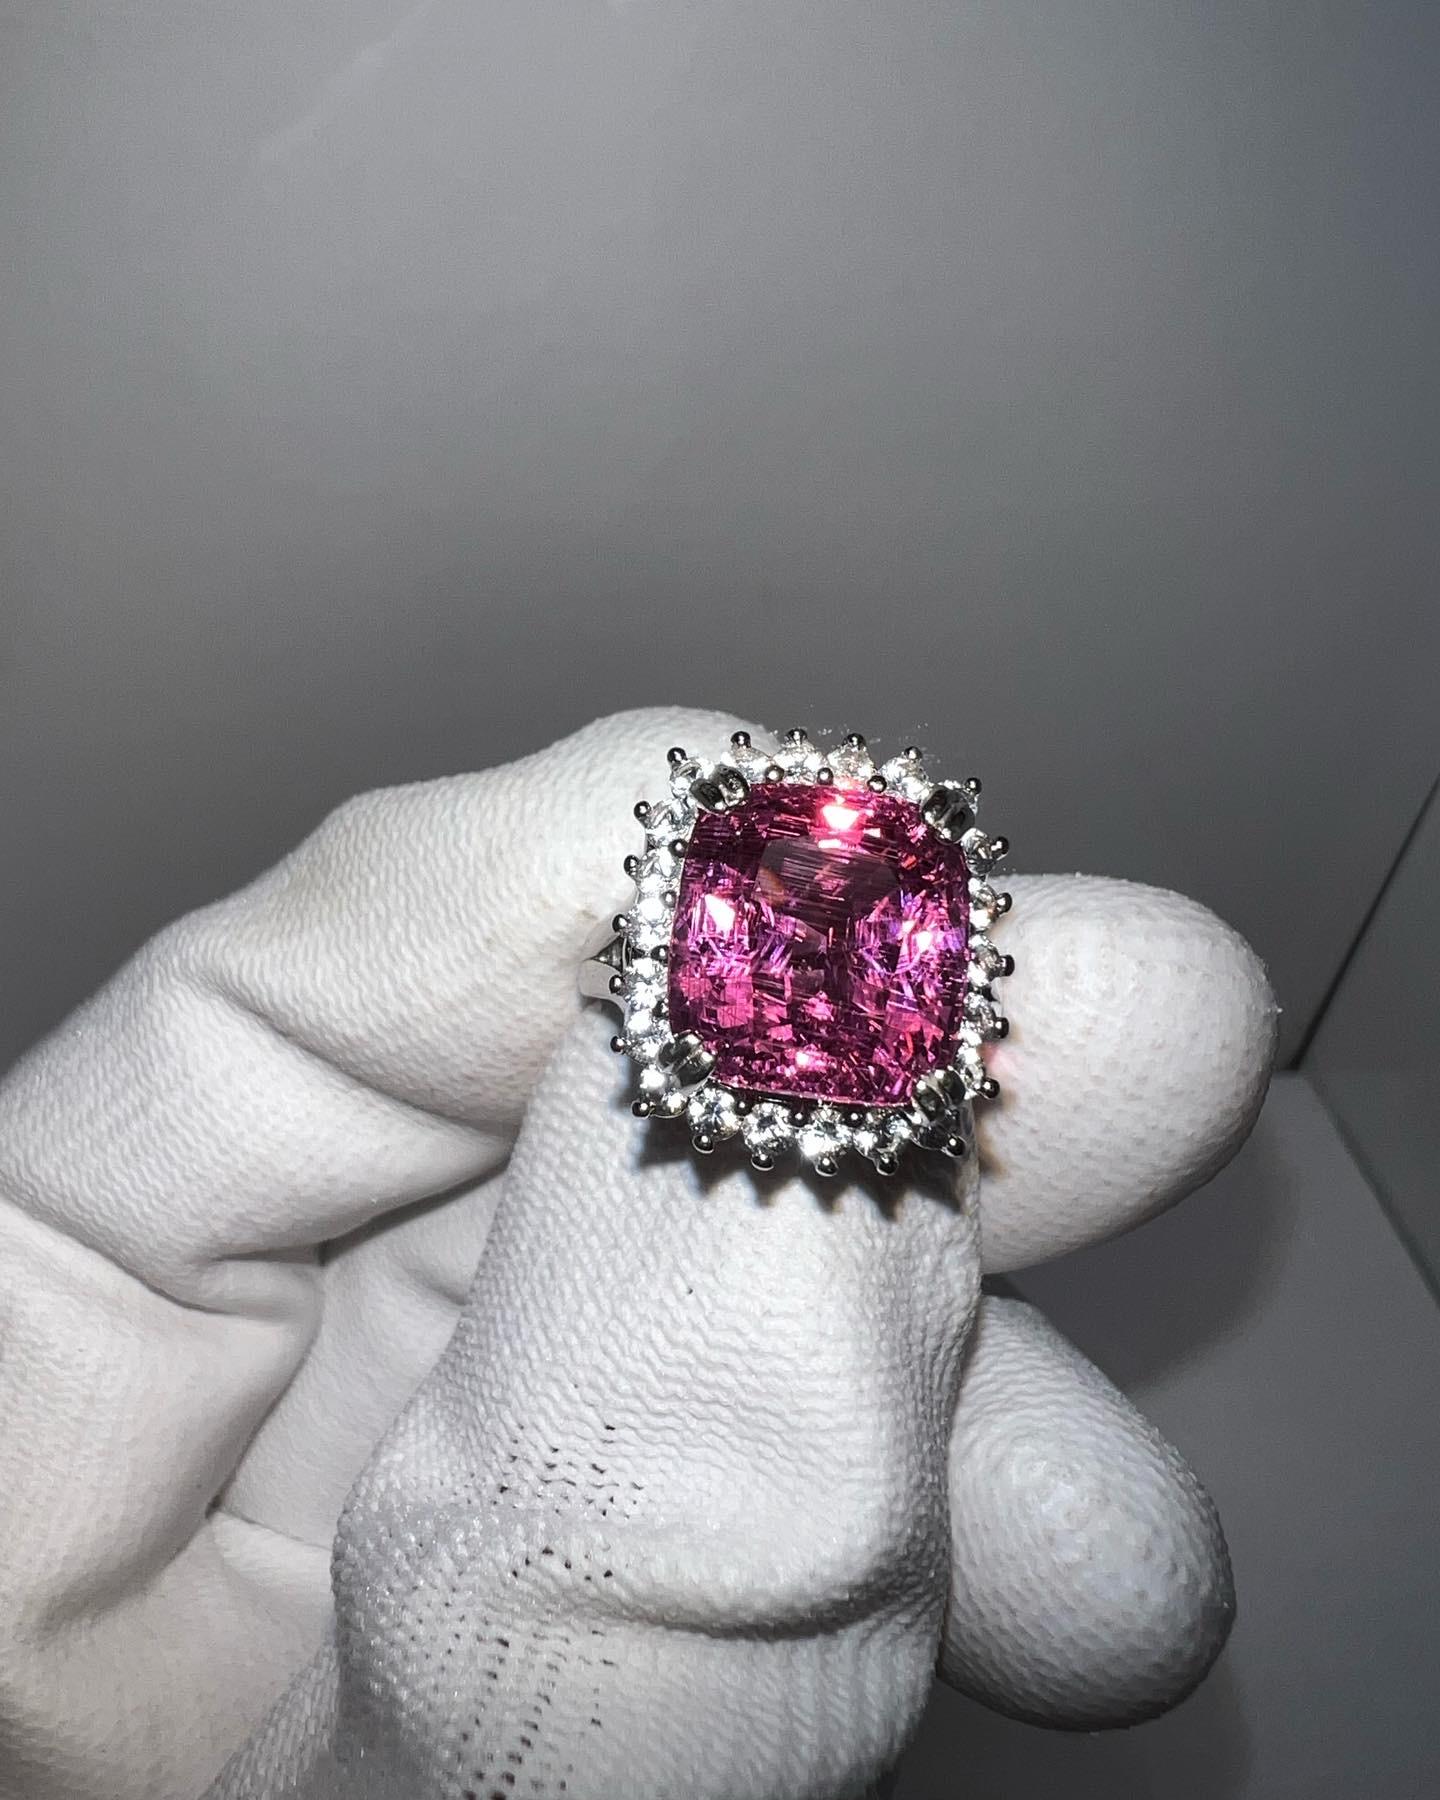 Contemporary Rare 10.3 Carat Purplish Pink Spinel Coctail Ring, Gemstone is GIA Certified